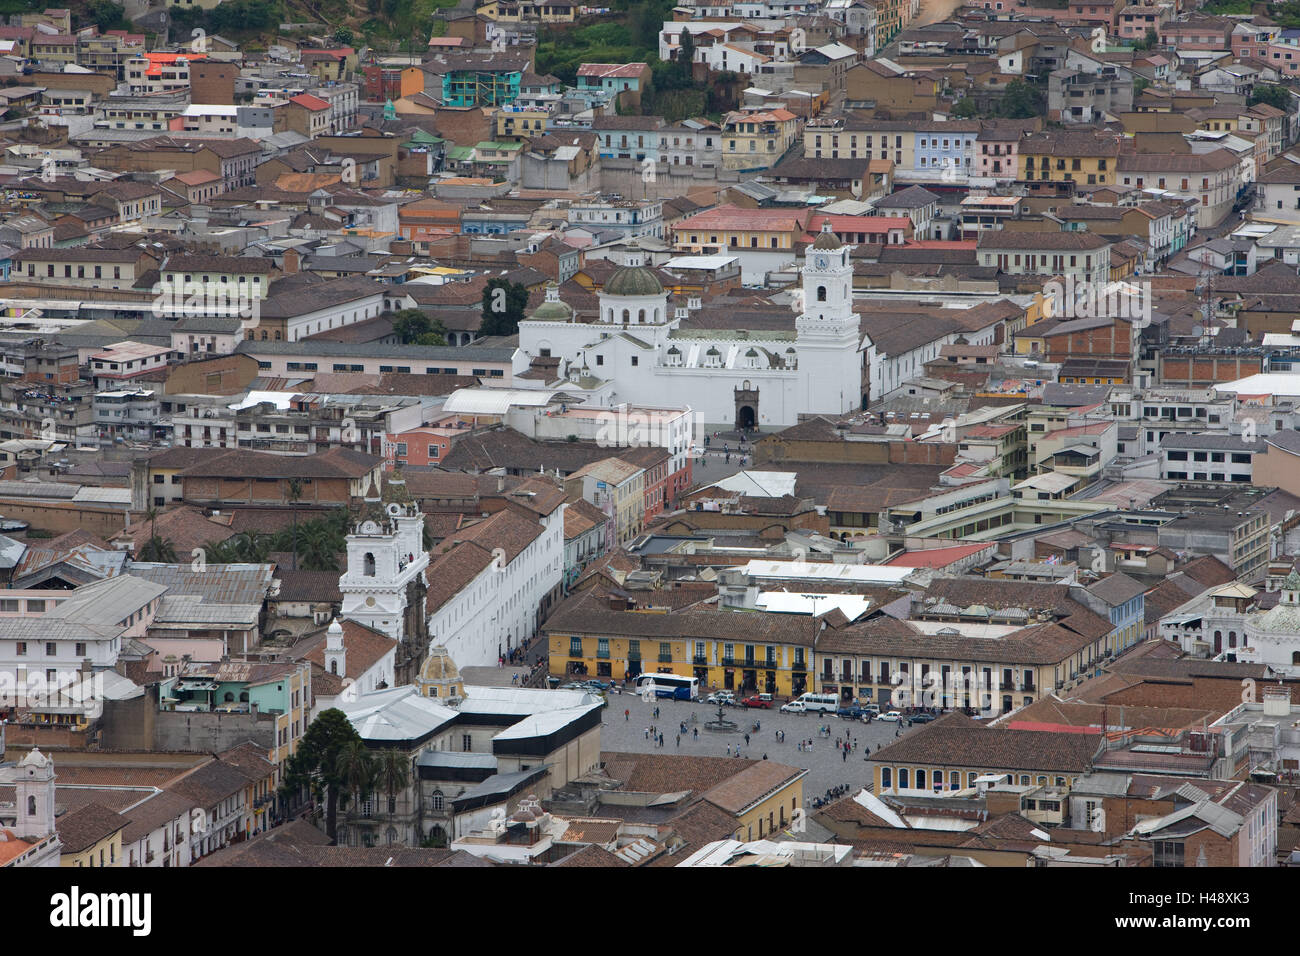 Ecuador, province Pichincha, Quito, Parque la Panecillo, town overview, South America, town, capital, hill, Panecillo, lookout, overview, houses, roofs, towers, church, churches, view, overview, Stock Photo